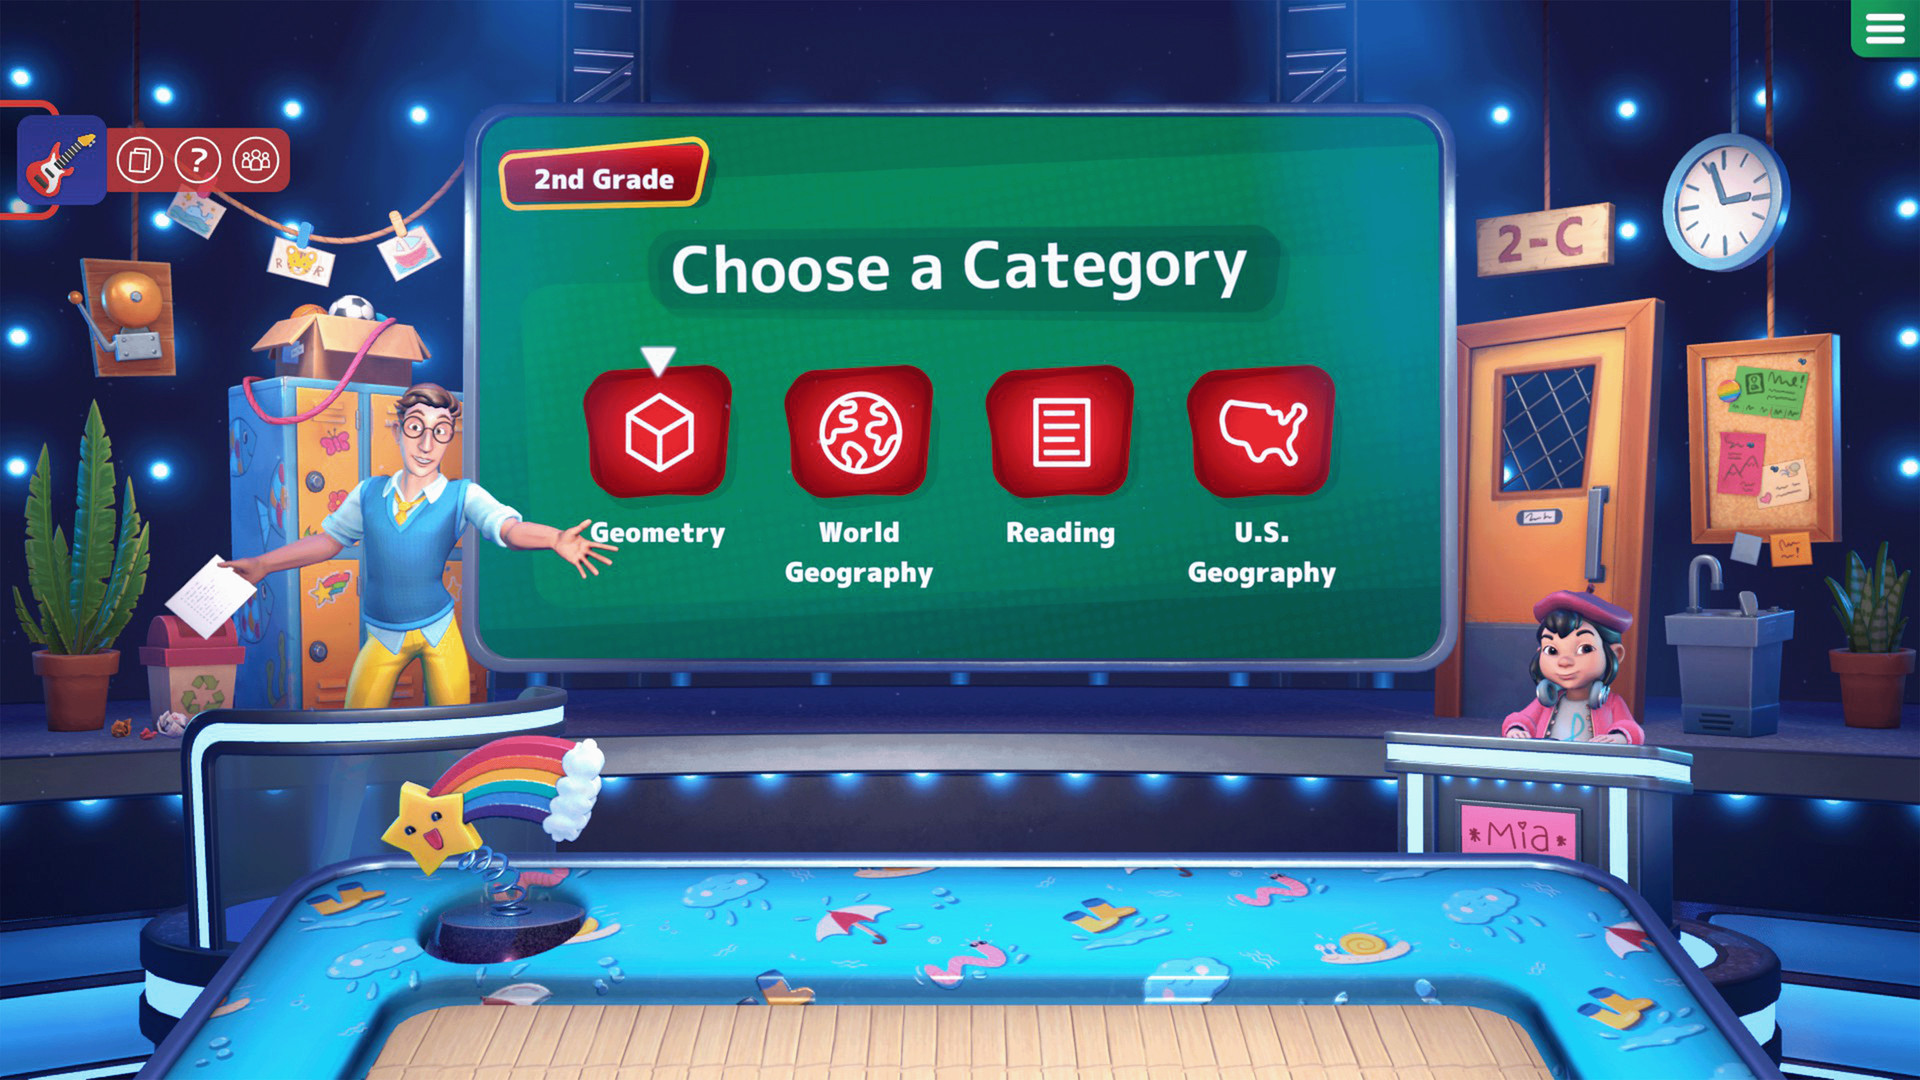 Are You Smarter Than A 5th Grader? - Extra Credit DLC Steam CD Key